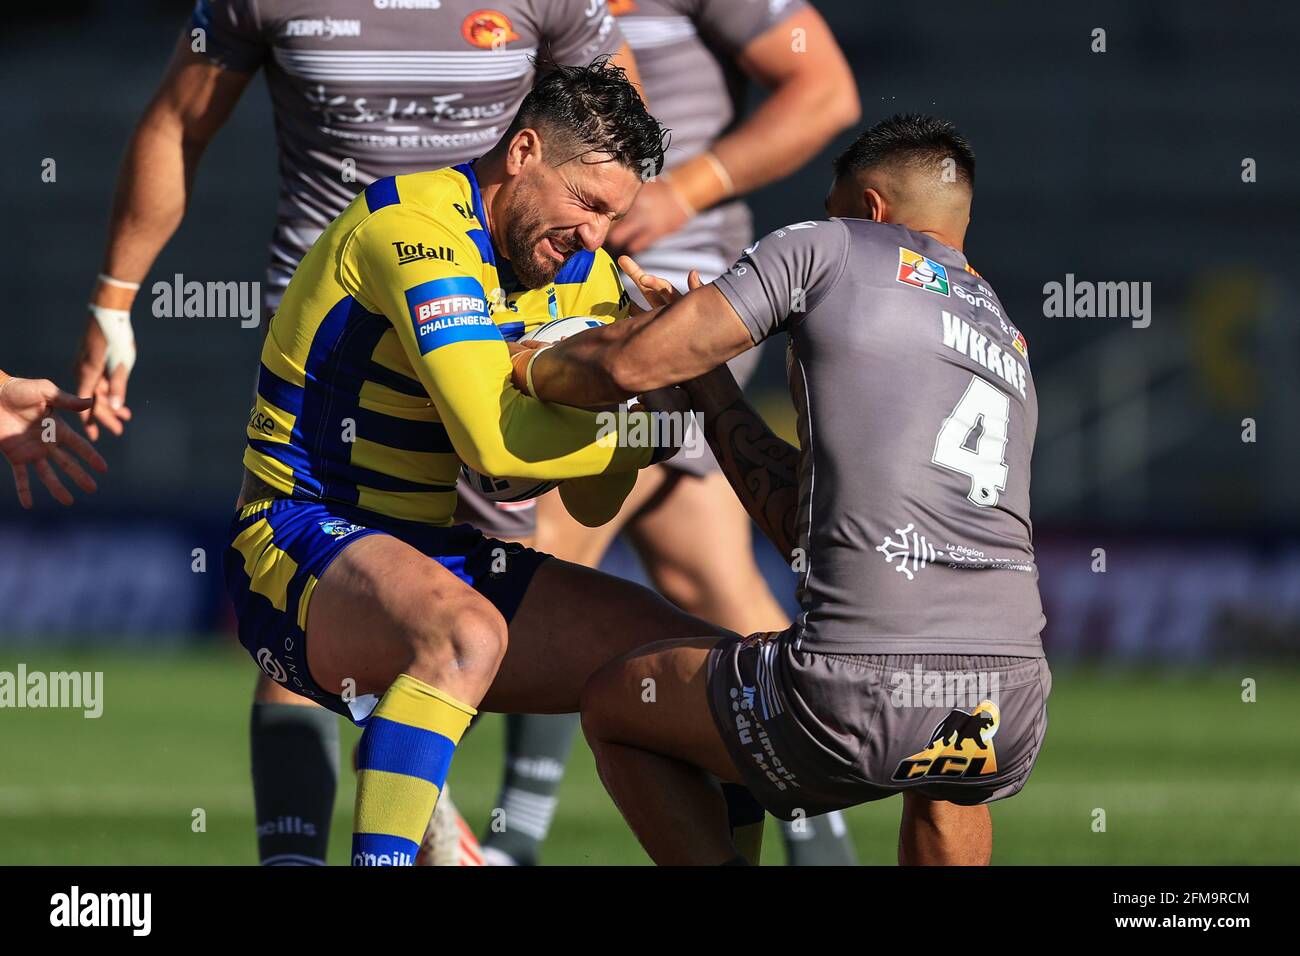 Leeds, UK. 07th May, 2021. Gareth Widdop (7) of Warrington Wolves pulls the ball back from Dean Whare (4) of Catalans Dragons in Leeds, United Kingdom on 5/7/2021. (Photo by Mark Cosgrove/News Images/Sipa USA) Credit: Sipa USA/Alamy Live News Stock Photo